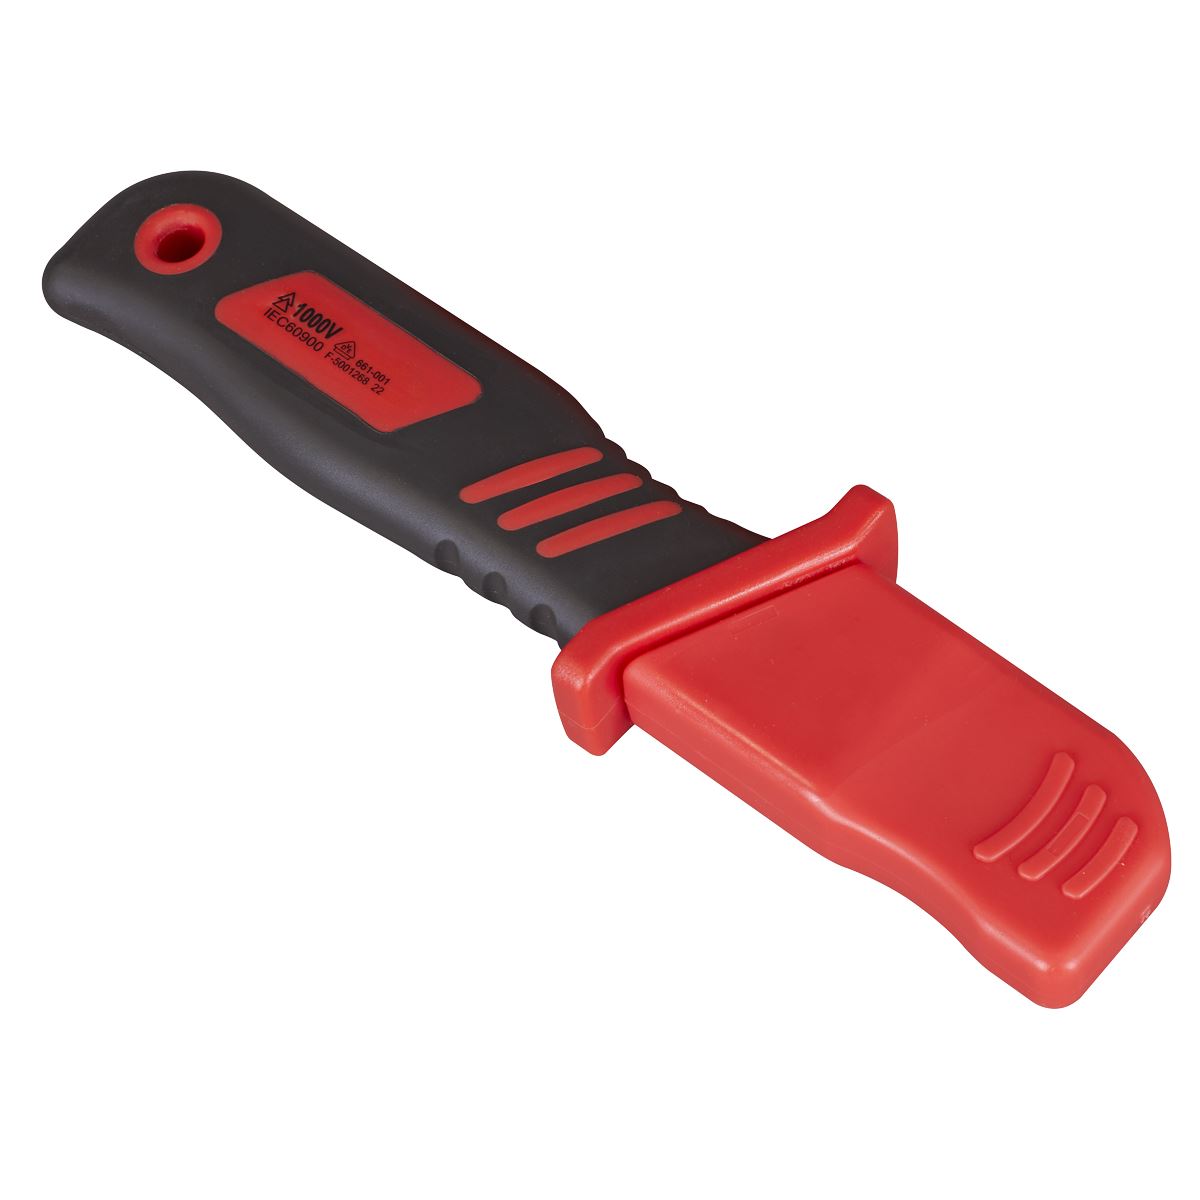 Sealey Premier Cable Knife - VDE Approved